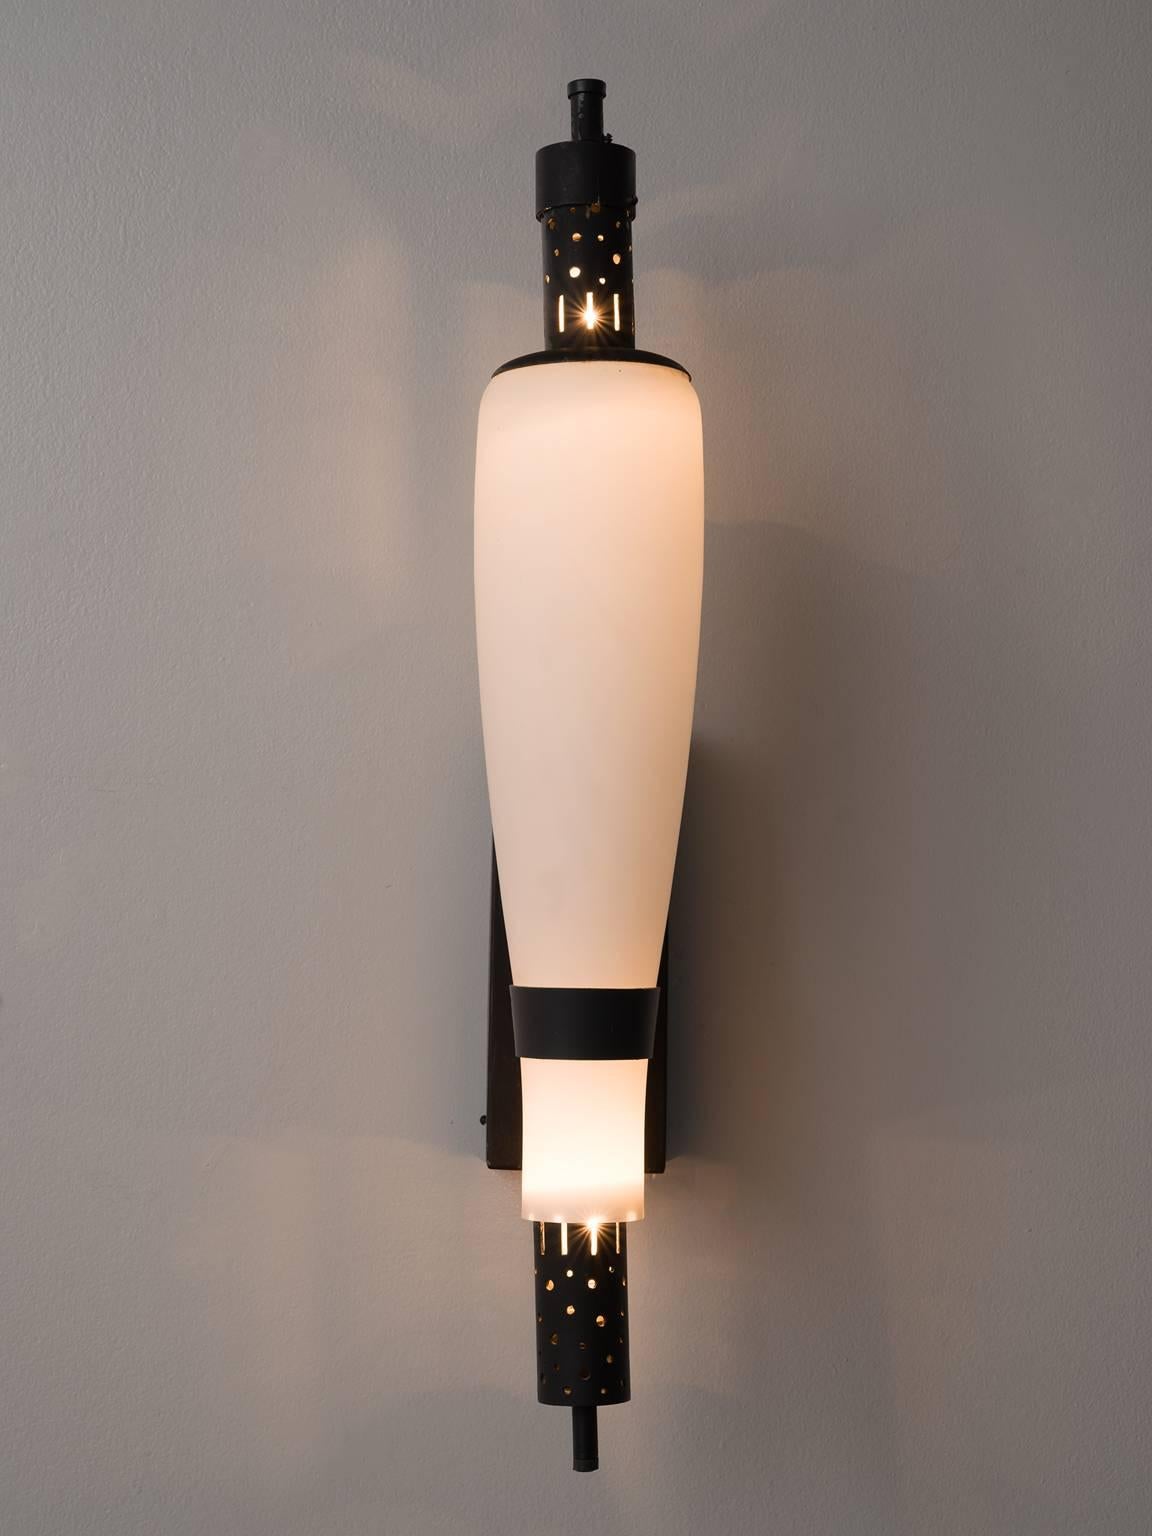 Art Deco wall lights, steel and opaline glass, France, 1940s. 

These delicate tapered wall lights are the perfect middle between ornate and simplistic. The opaline glass has a pure form whereas the base and top are punctured in order to let the